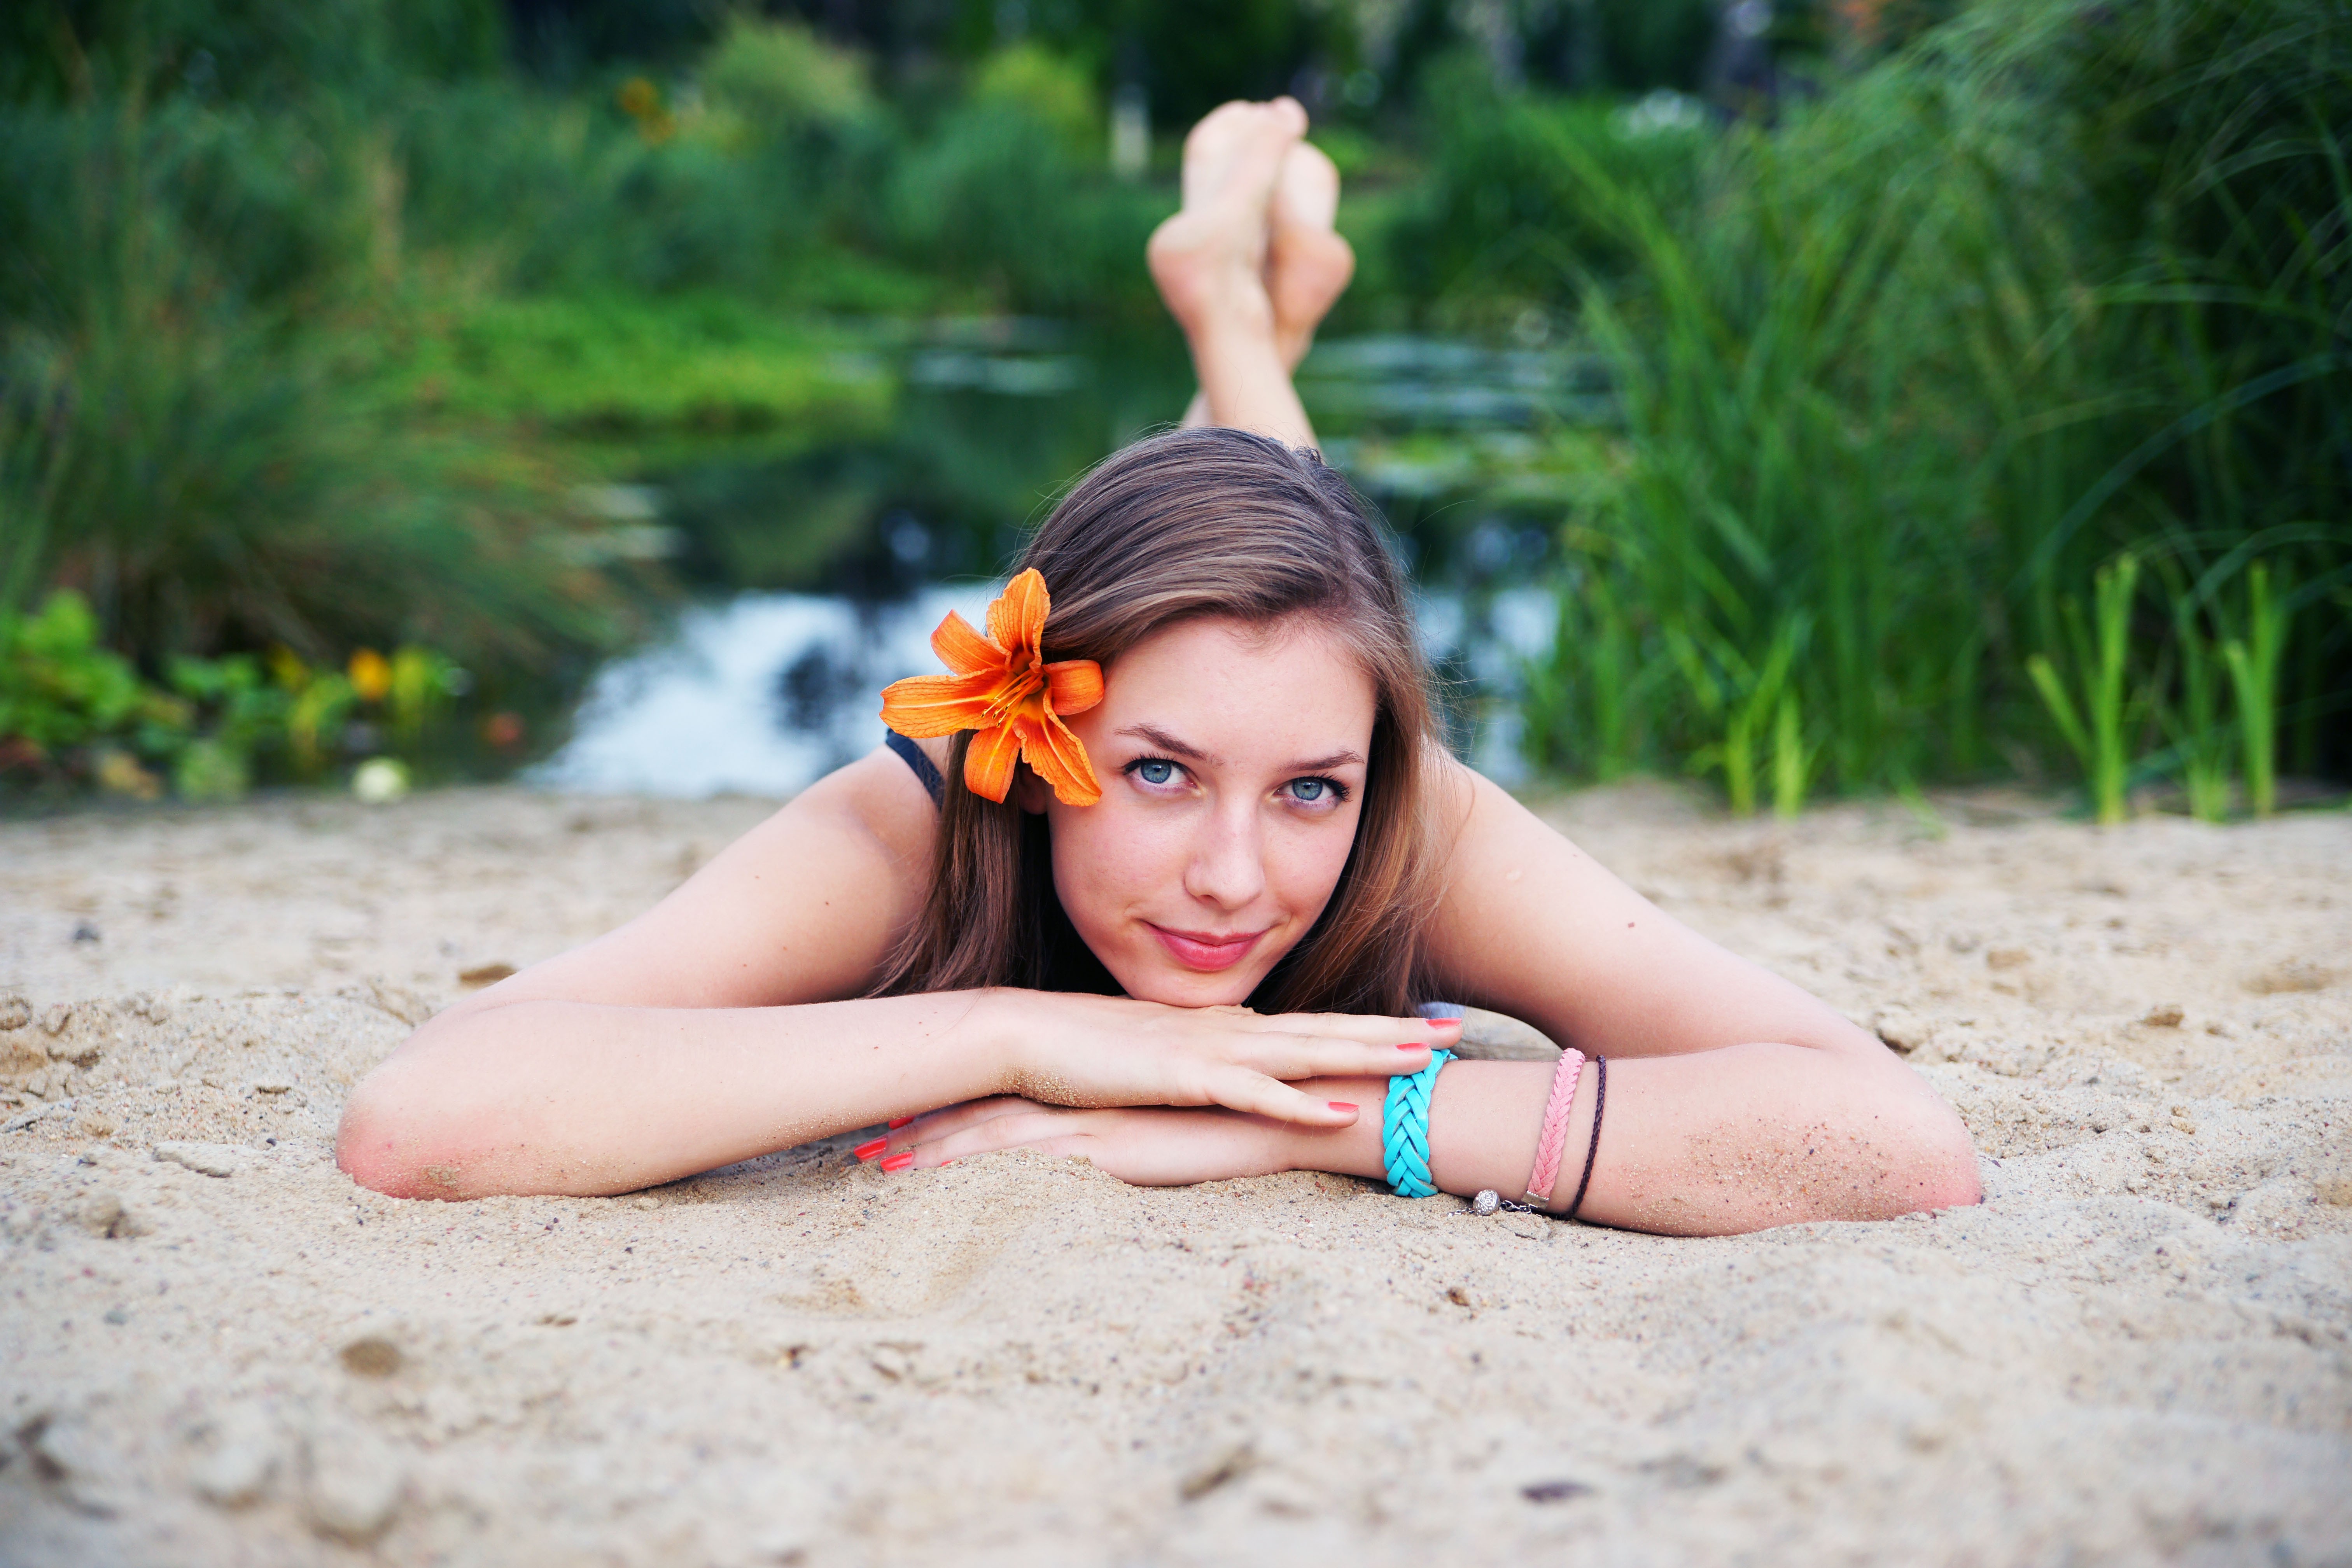 People 6048x4032 women women outdoors blue eyes sand model looking at viewer outdoors painted nails red nails flower in hair legs up brunette